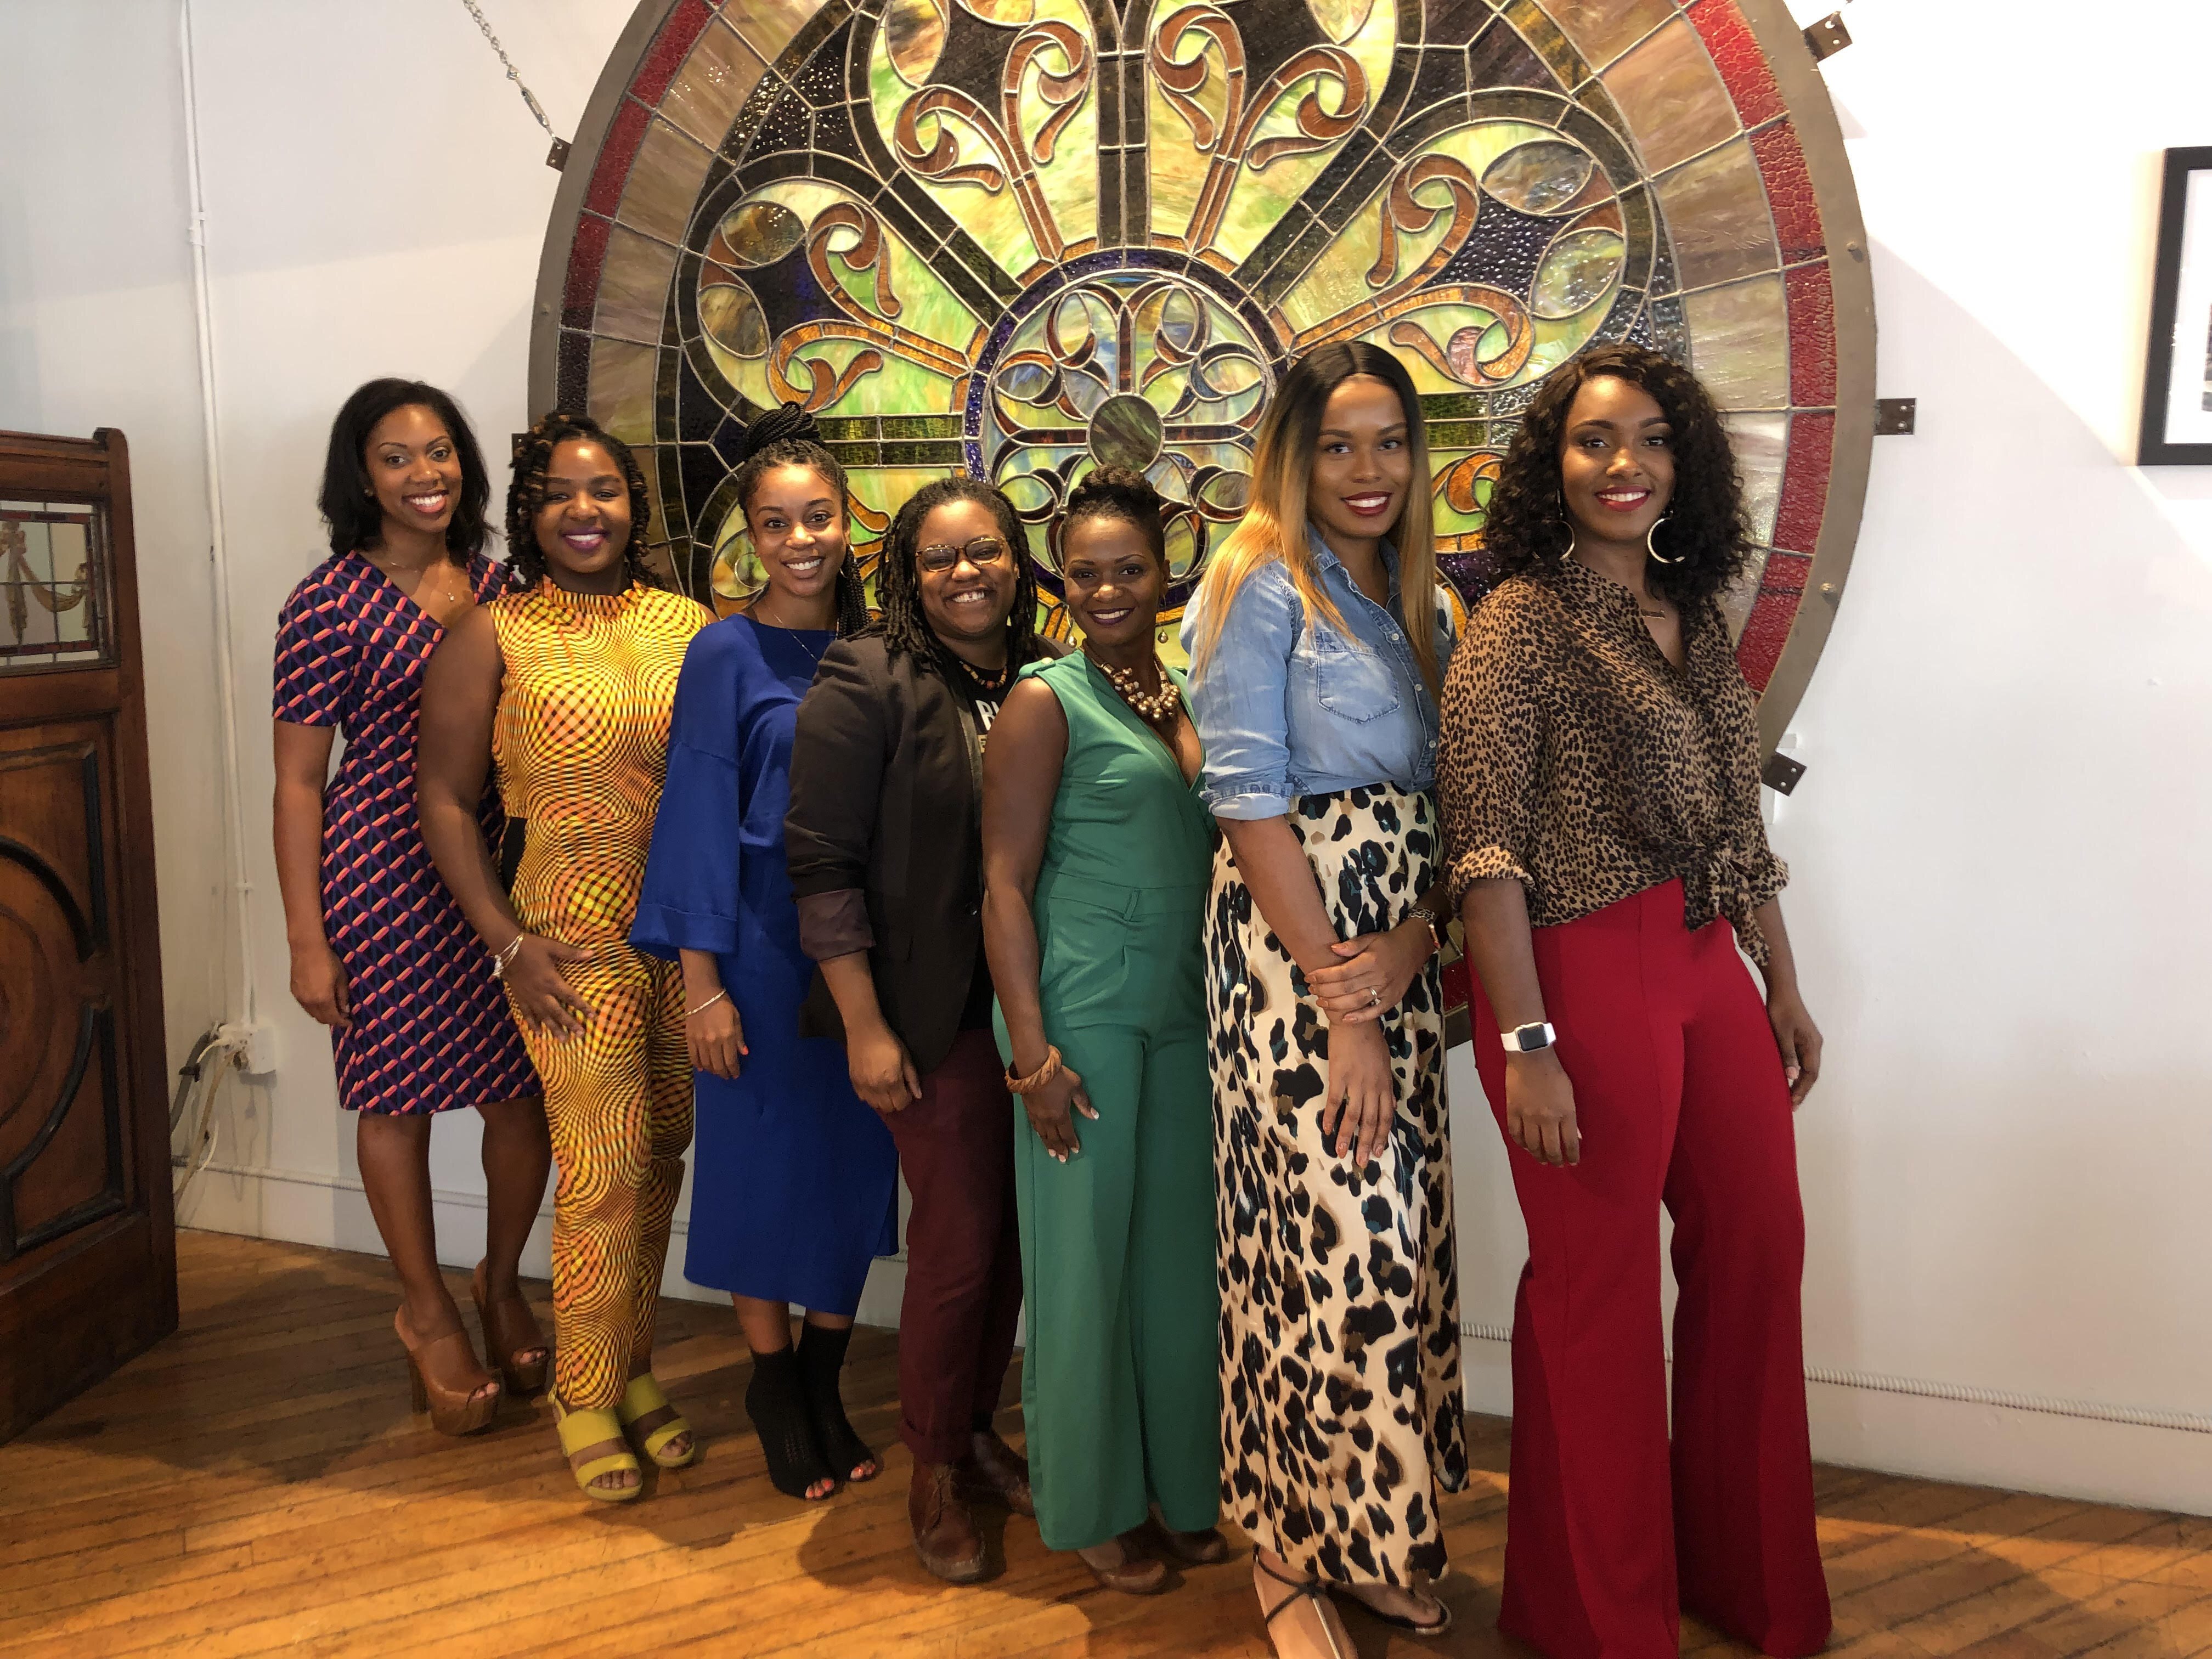 Auntie Round Table panelists ranged in age, careers and experience. The women discussed everything from mental health and child birth to the challenges facing female veterans and entrepreneurs. (Erica Horton)